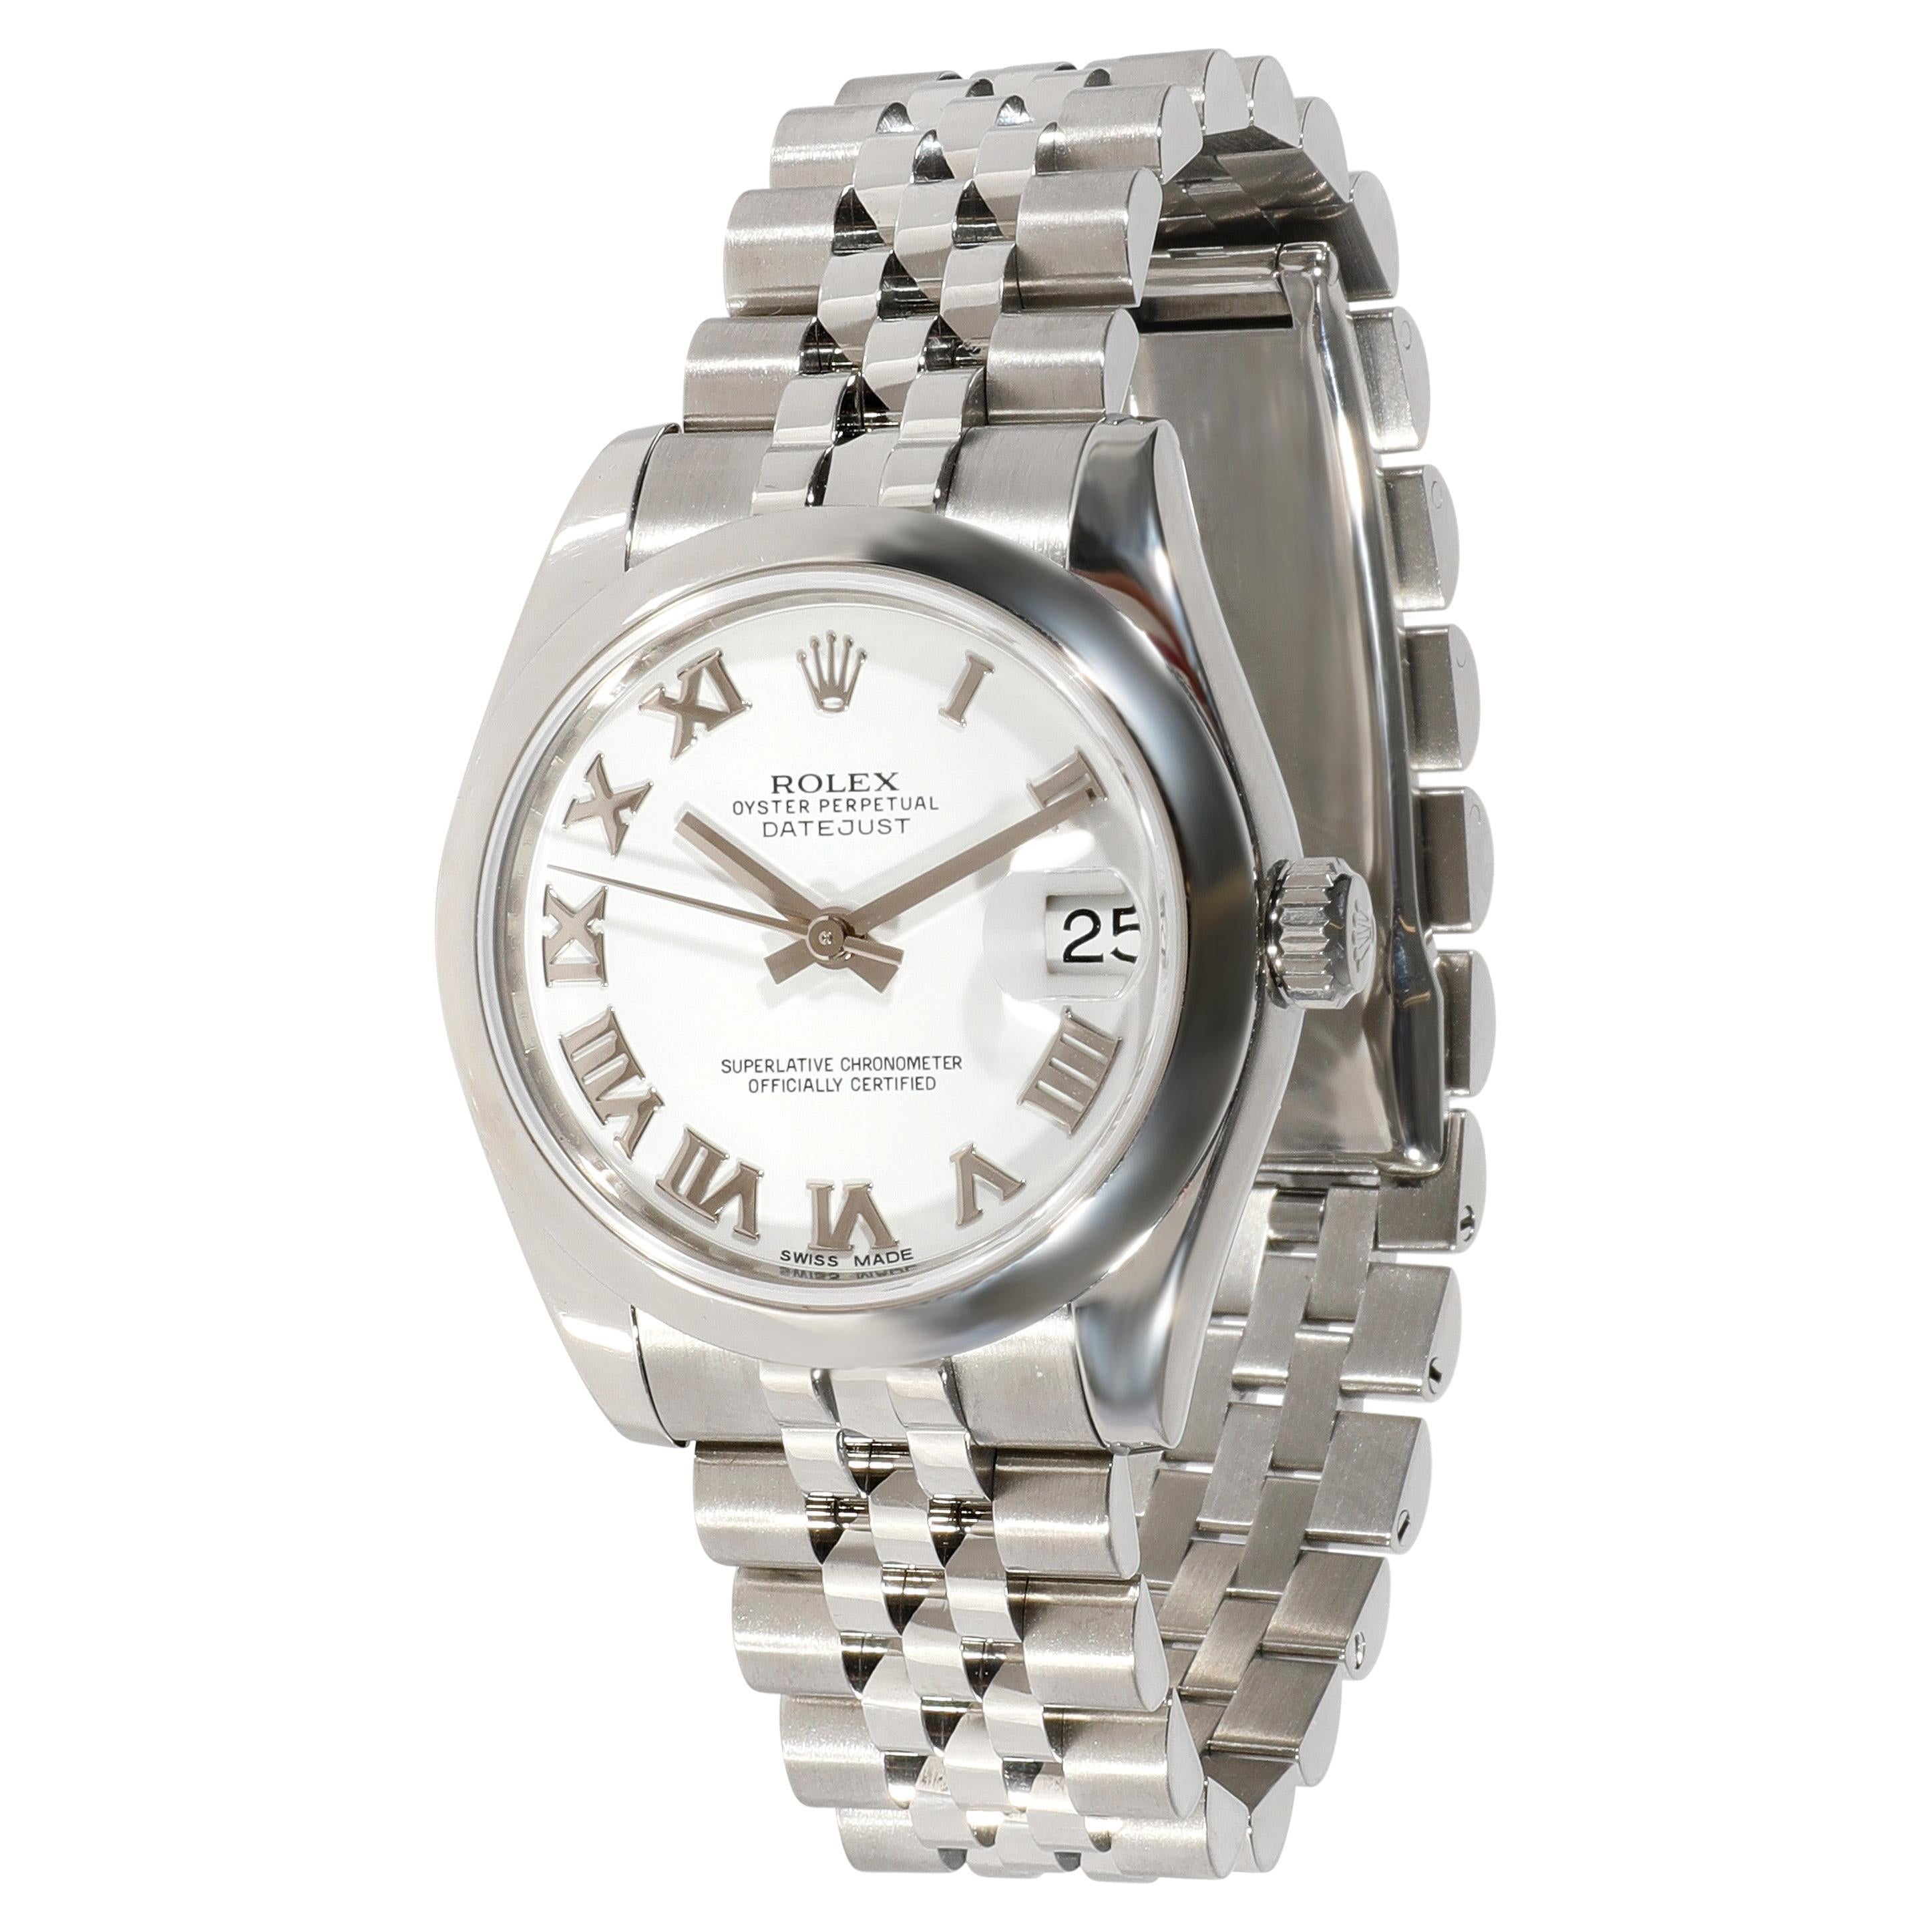 Rolex Datejust 178240 Unisex Watch in Stainless Steel For Sale at 1stDibs